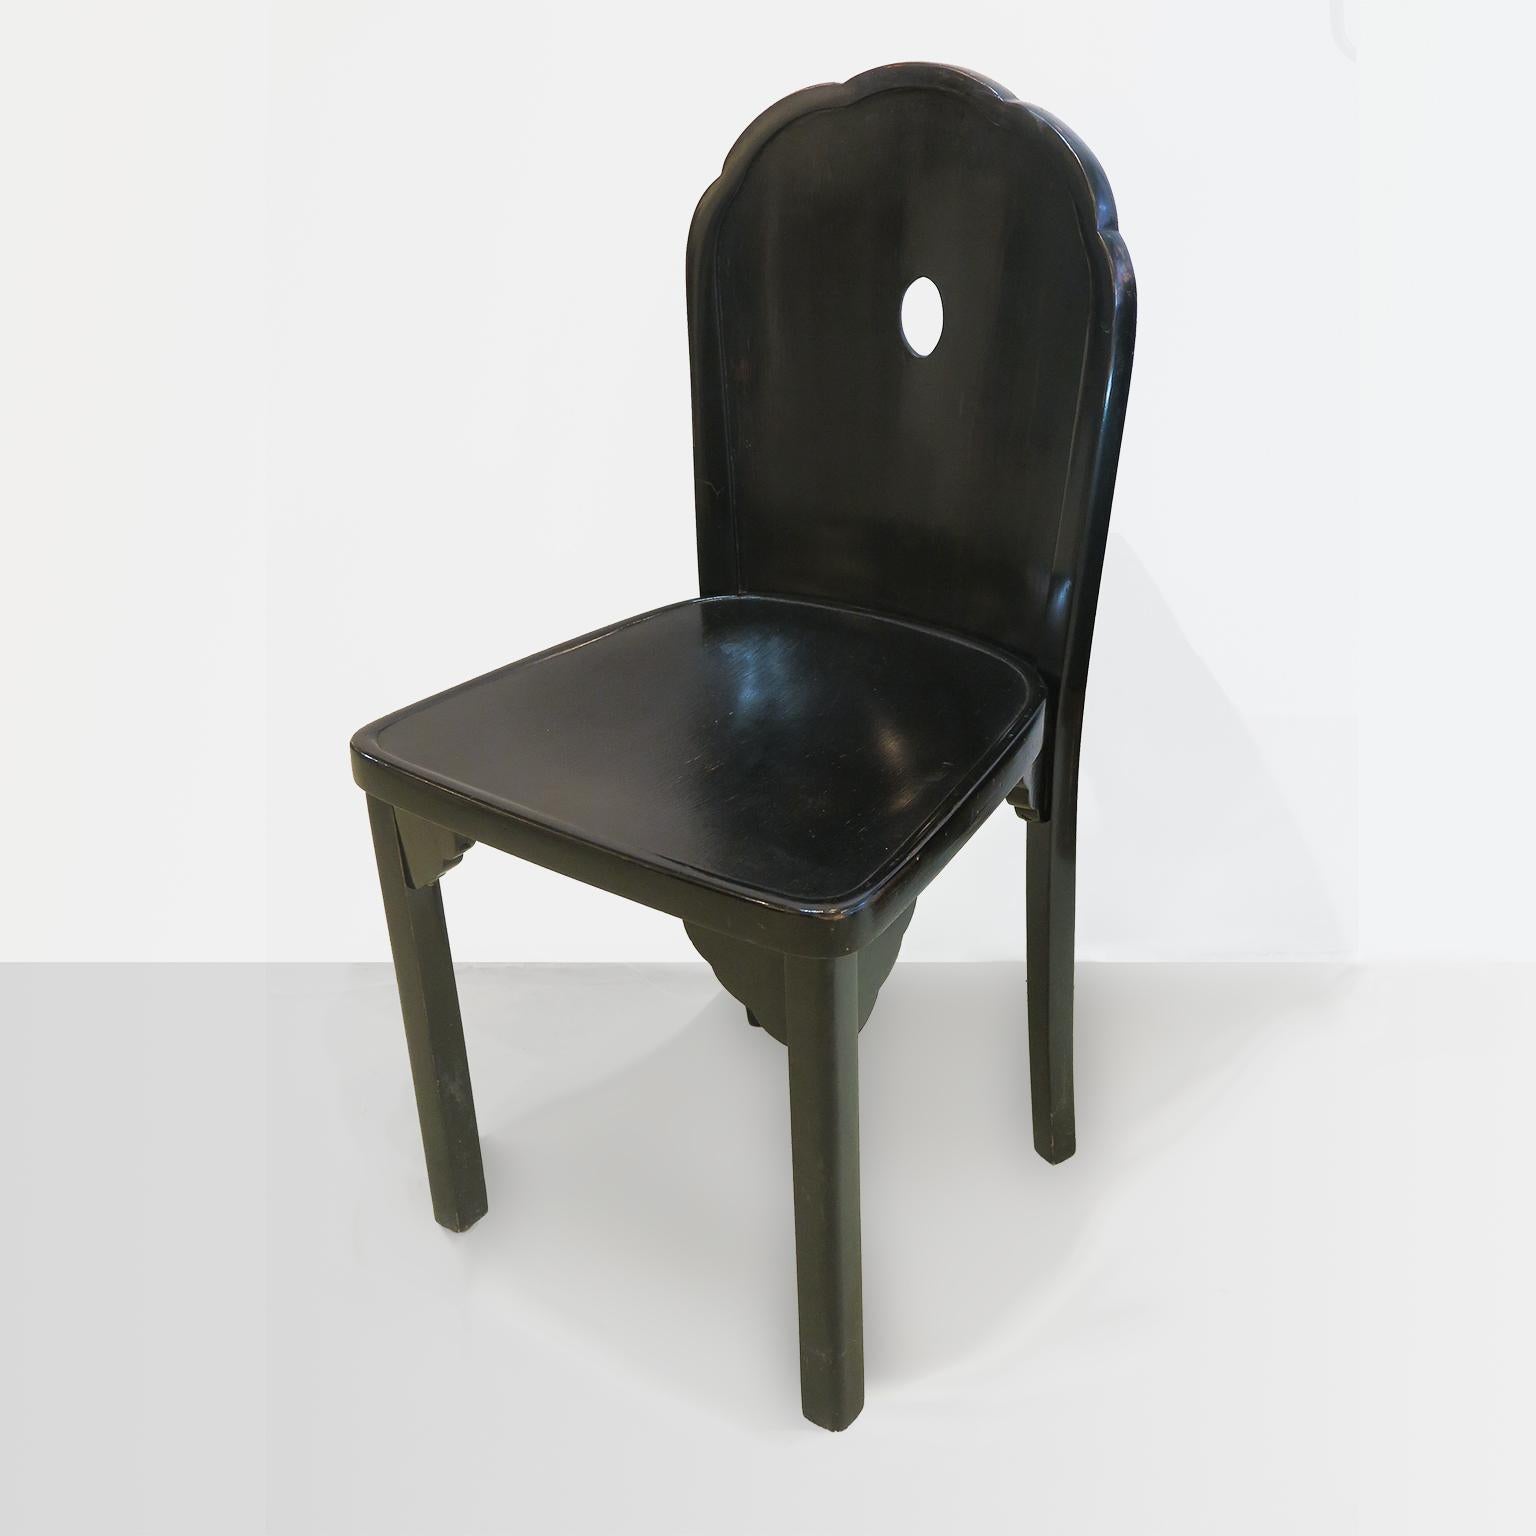 Vienna Secession pair of chairs, Model 826, in stained black beechwood by Josef Hoffmann for J. & J. Kohn, Vienna, 1914.
This chair was exhibited at the Werkbund Exhibition in Cologne, Germany, in 1914.
The chairs are unrestored and in original